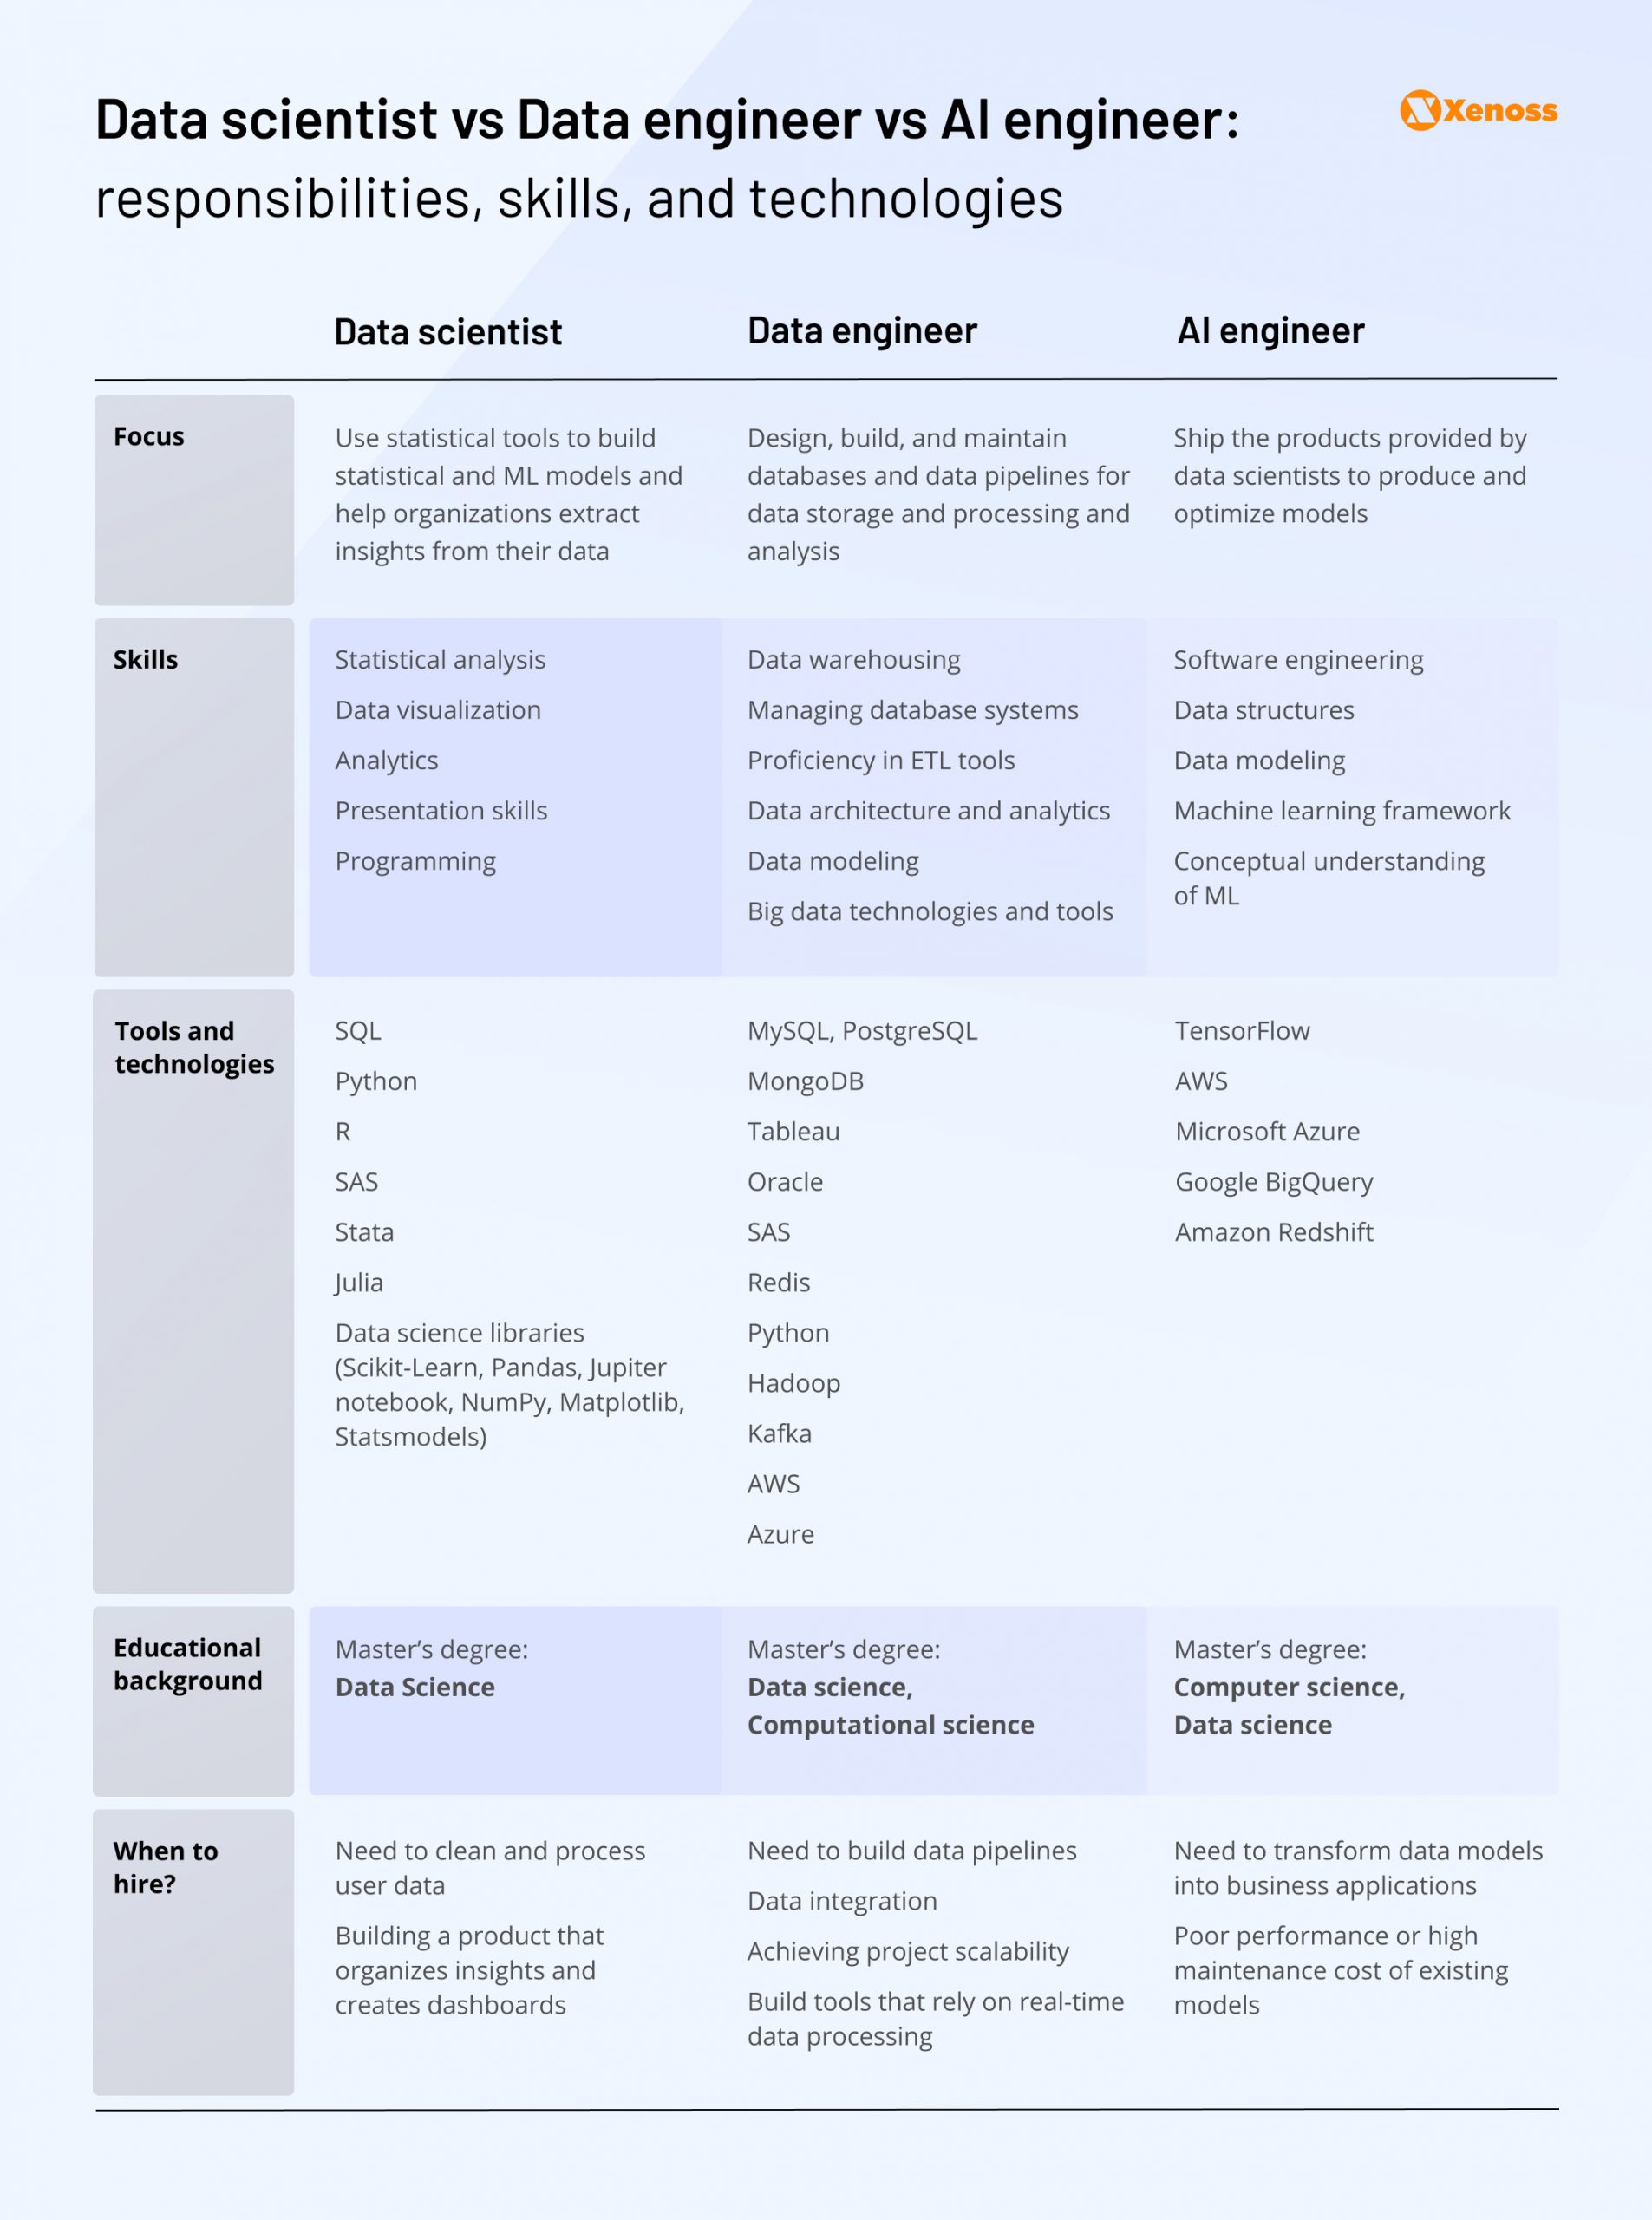 Table with a comparison of skills and responsibilities of a data scientist, data engineer, and AI engineer